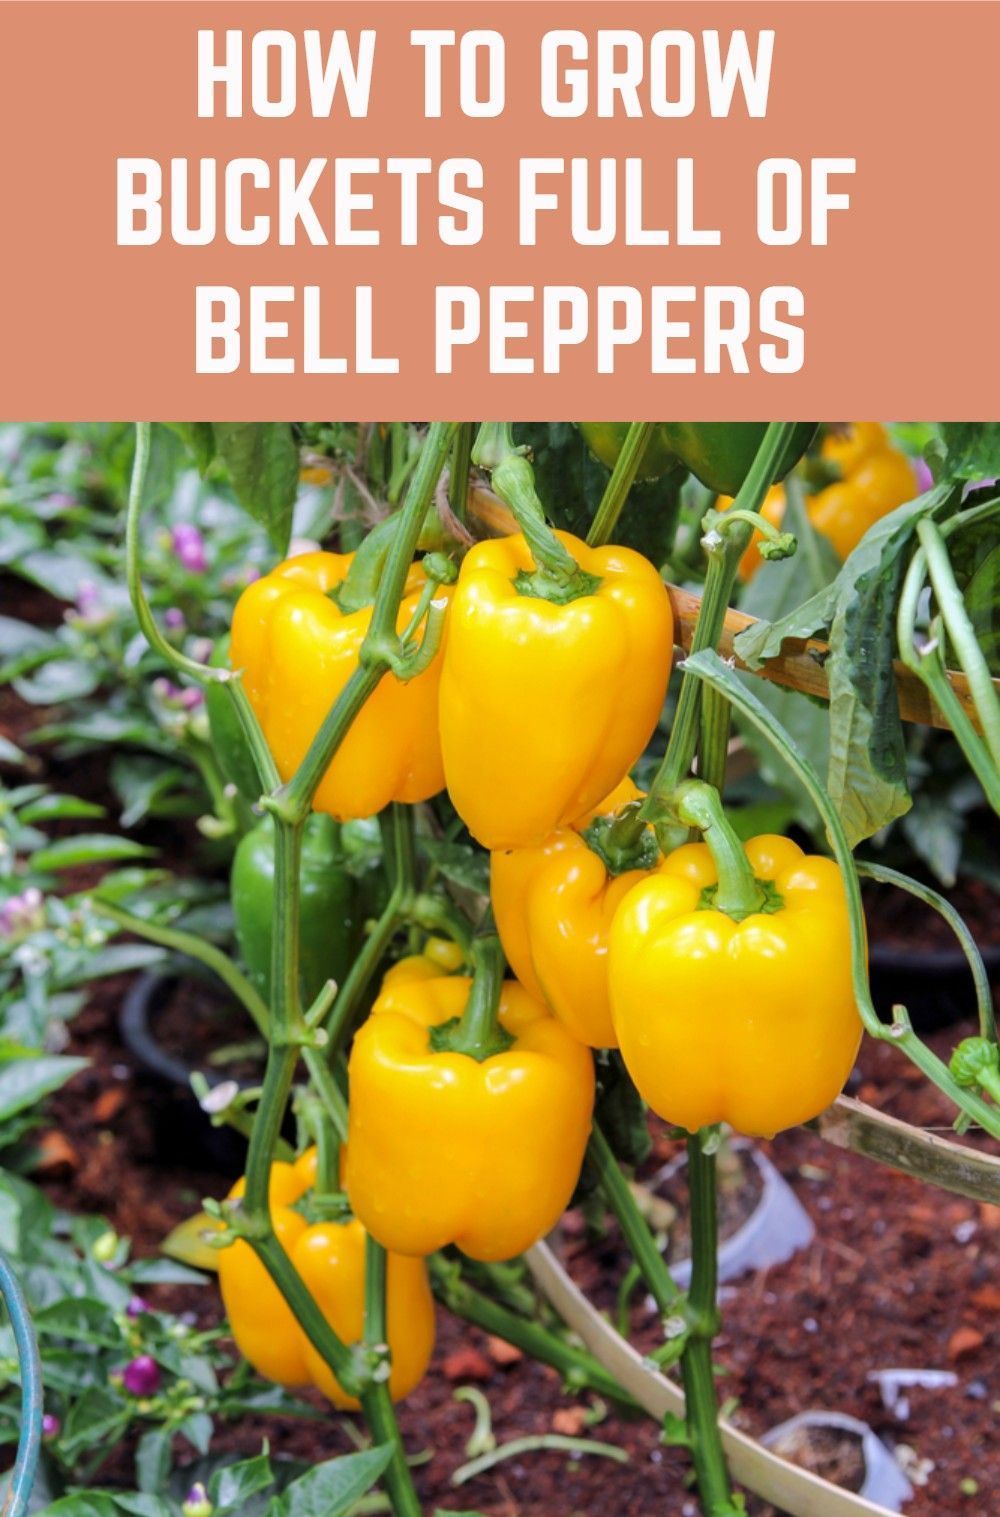 How To Grow Buckets Full Of Bell Peppers + Health Benefits & Recipes -   19 plants Decoration how to grow ideas